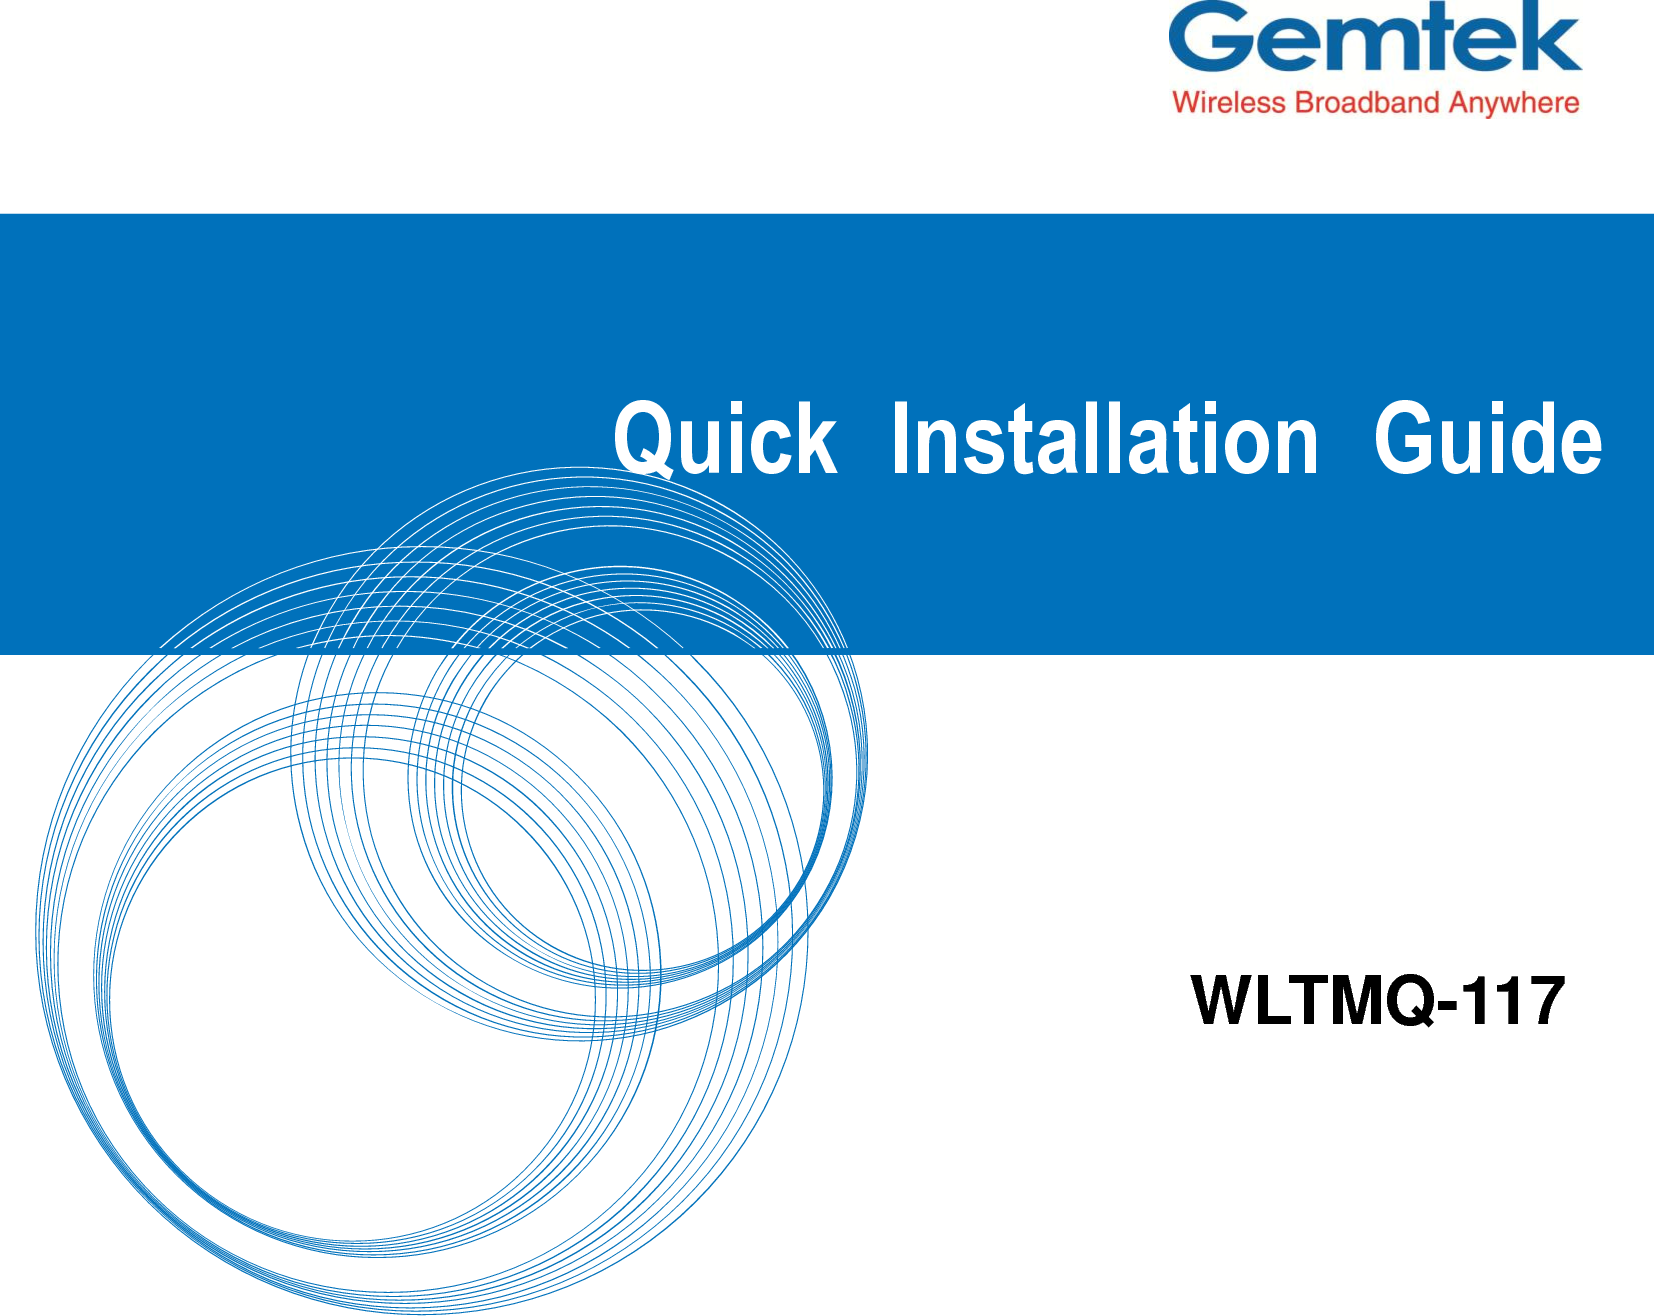                 Quick  Installation  Guide       WLTMQ-117 